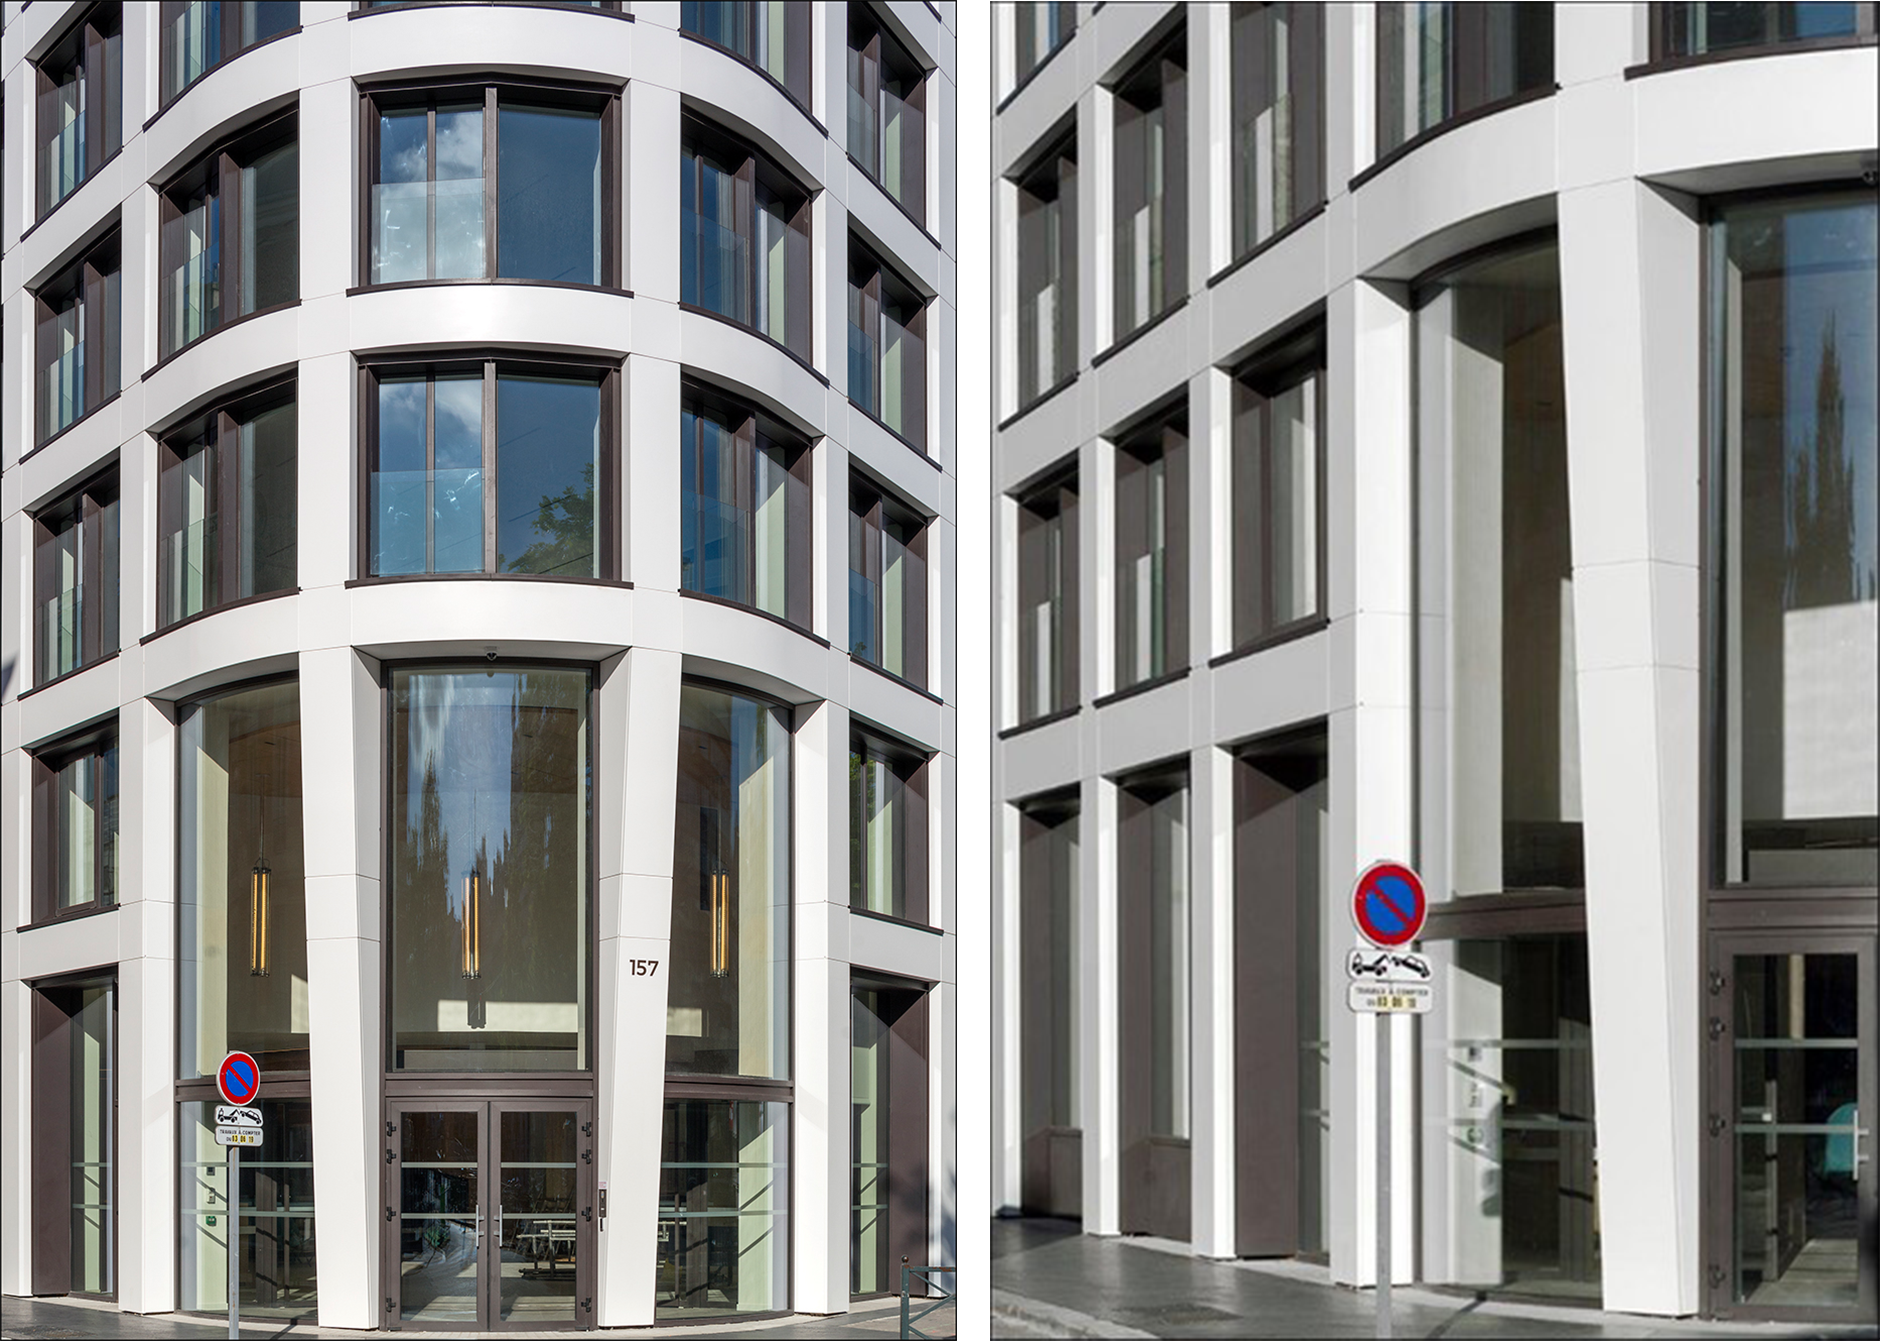 The facade of the office building in Neuilly (France) was covered with 800 panels of Corian® Solid Surface in the colour Glacier White